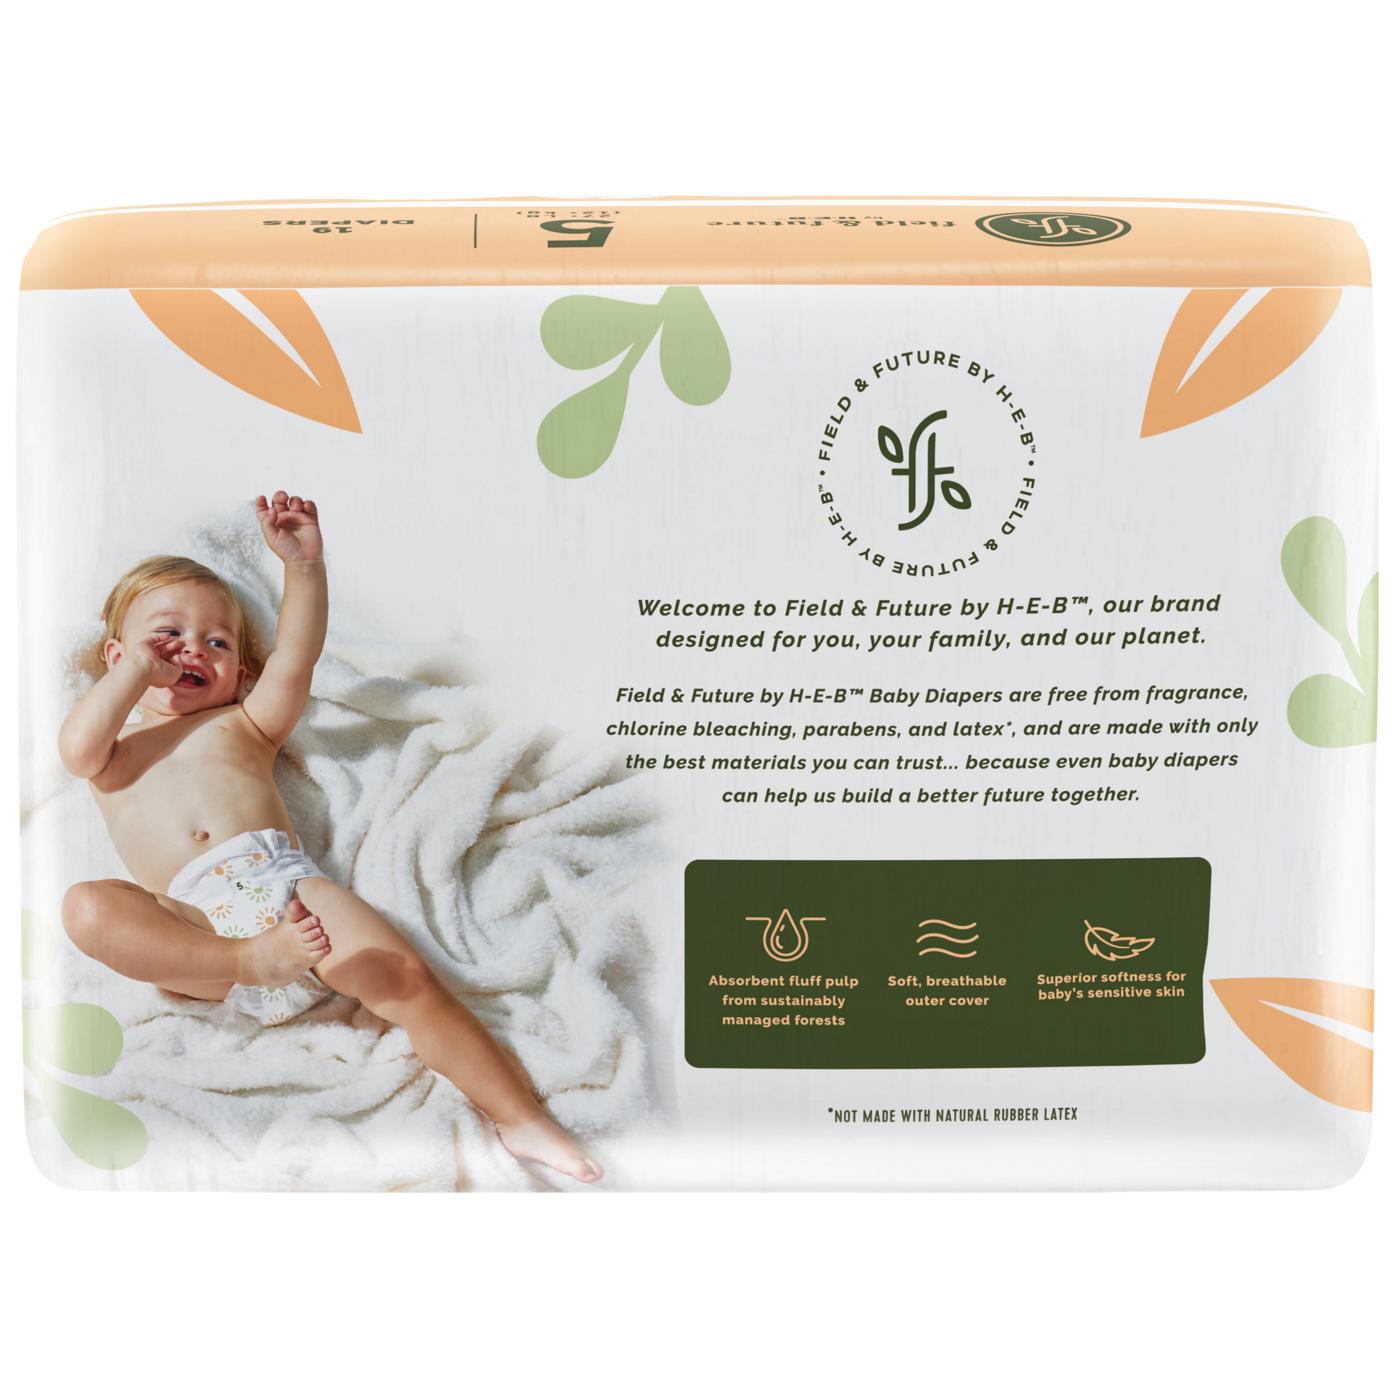 Field & Future by H-E-B Jumbo Pack Baby Diapers  - Size 5; image 5 of 6